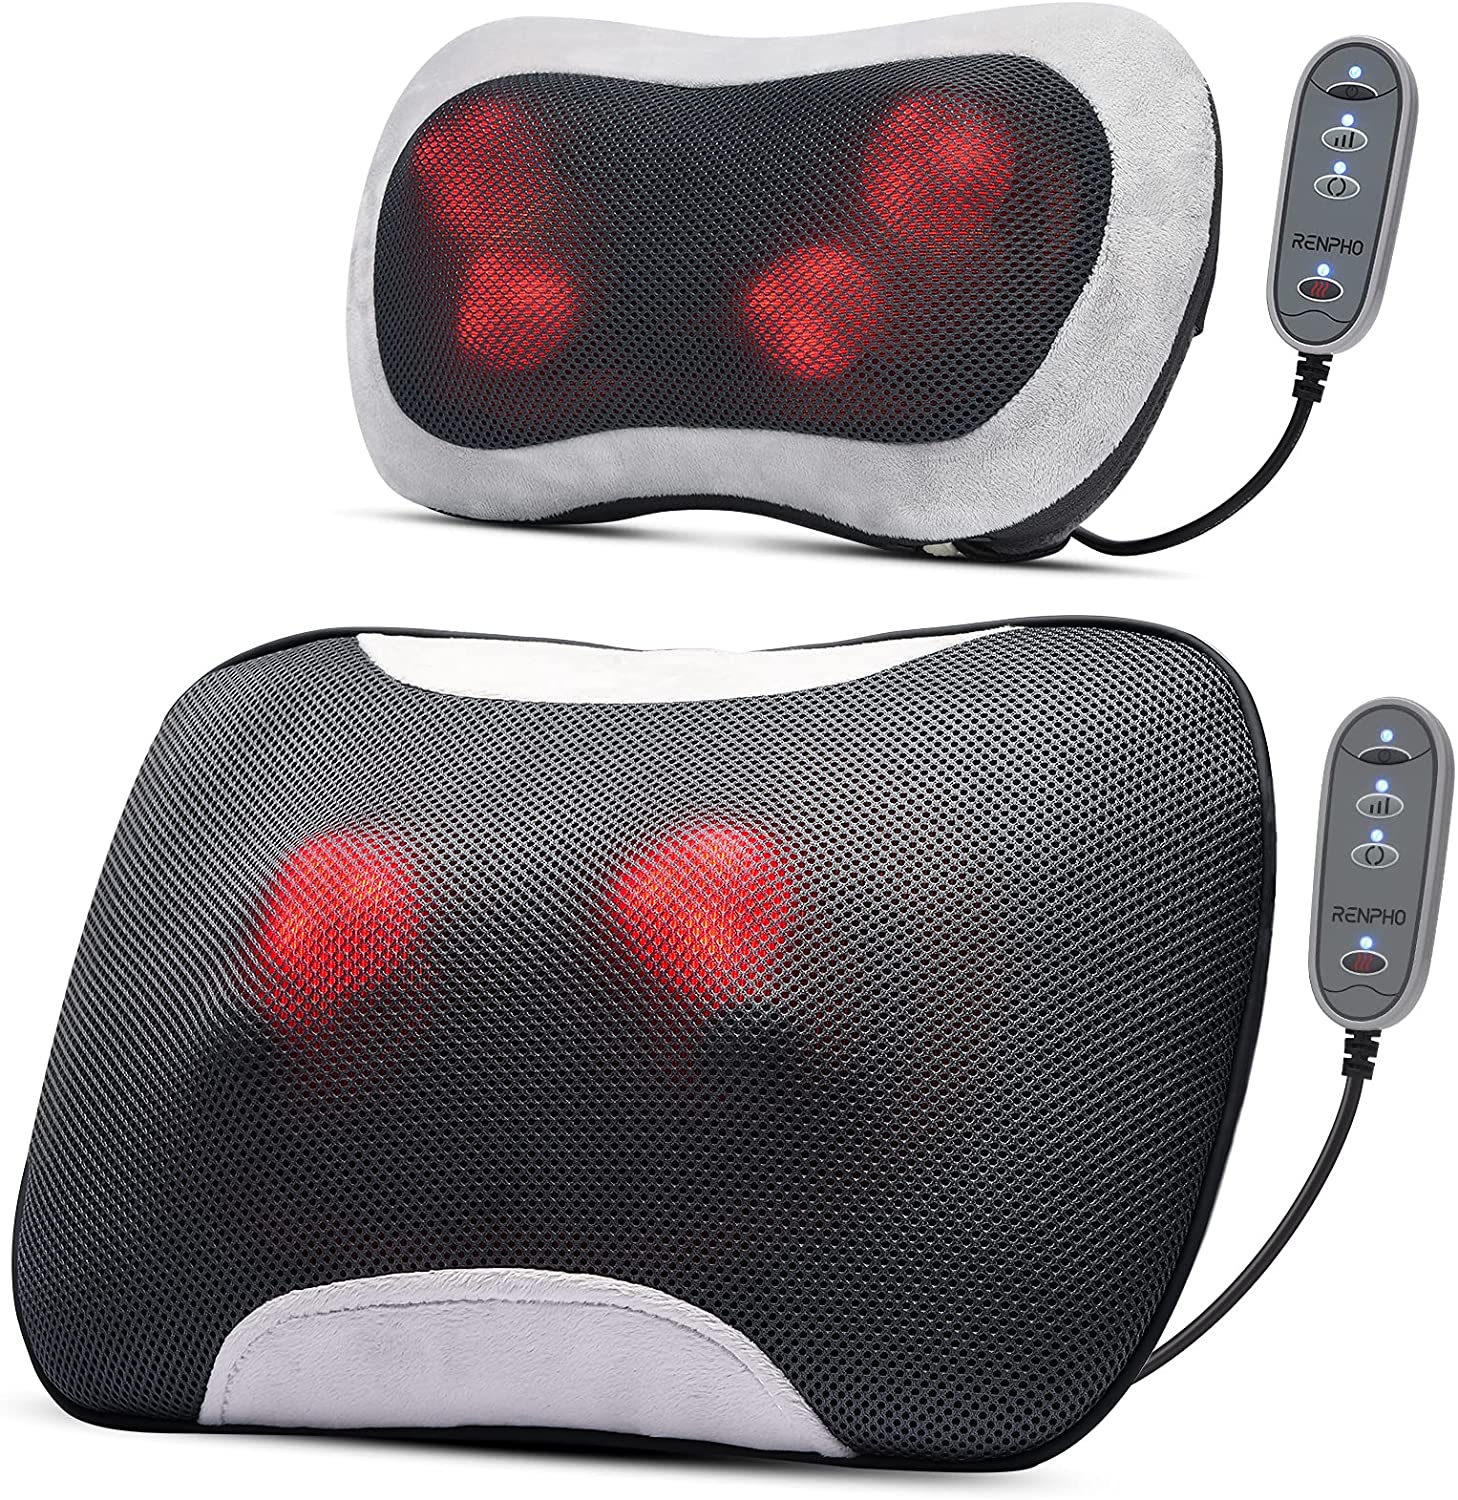 Neck Massager with Heat, Shiatsu Back Shoulder Massager,Gifts for Gray